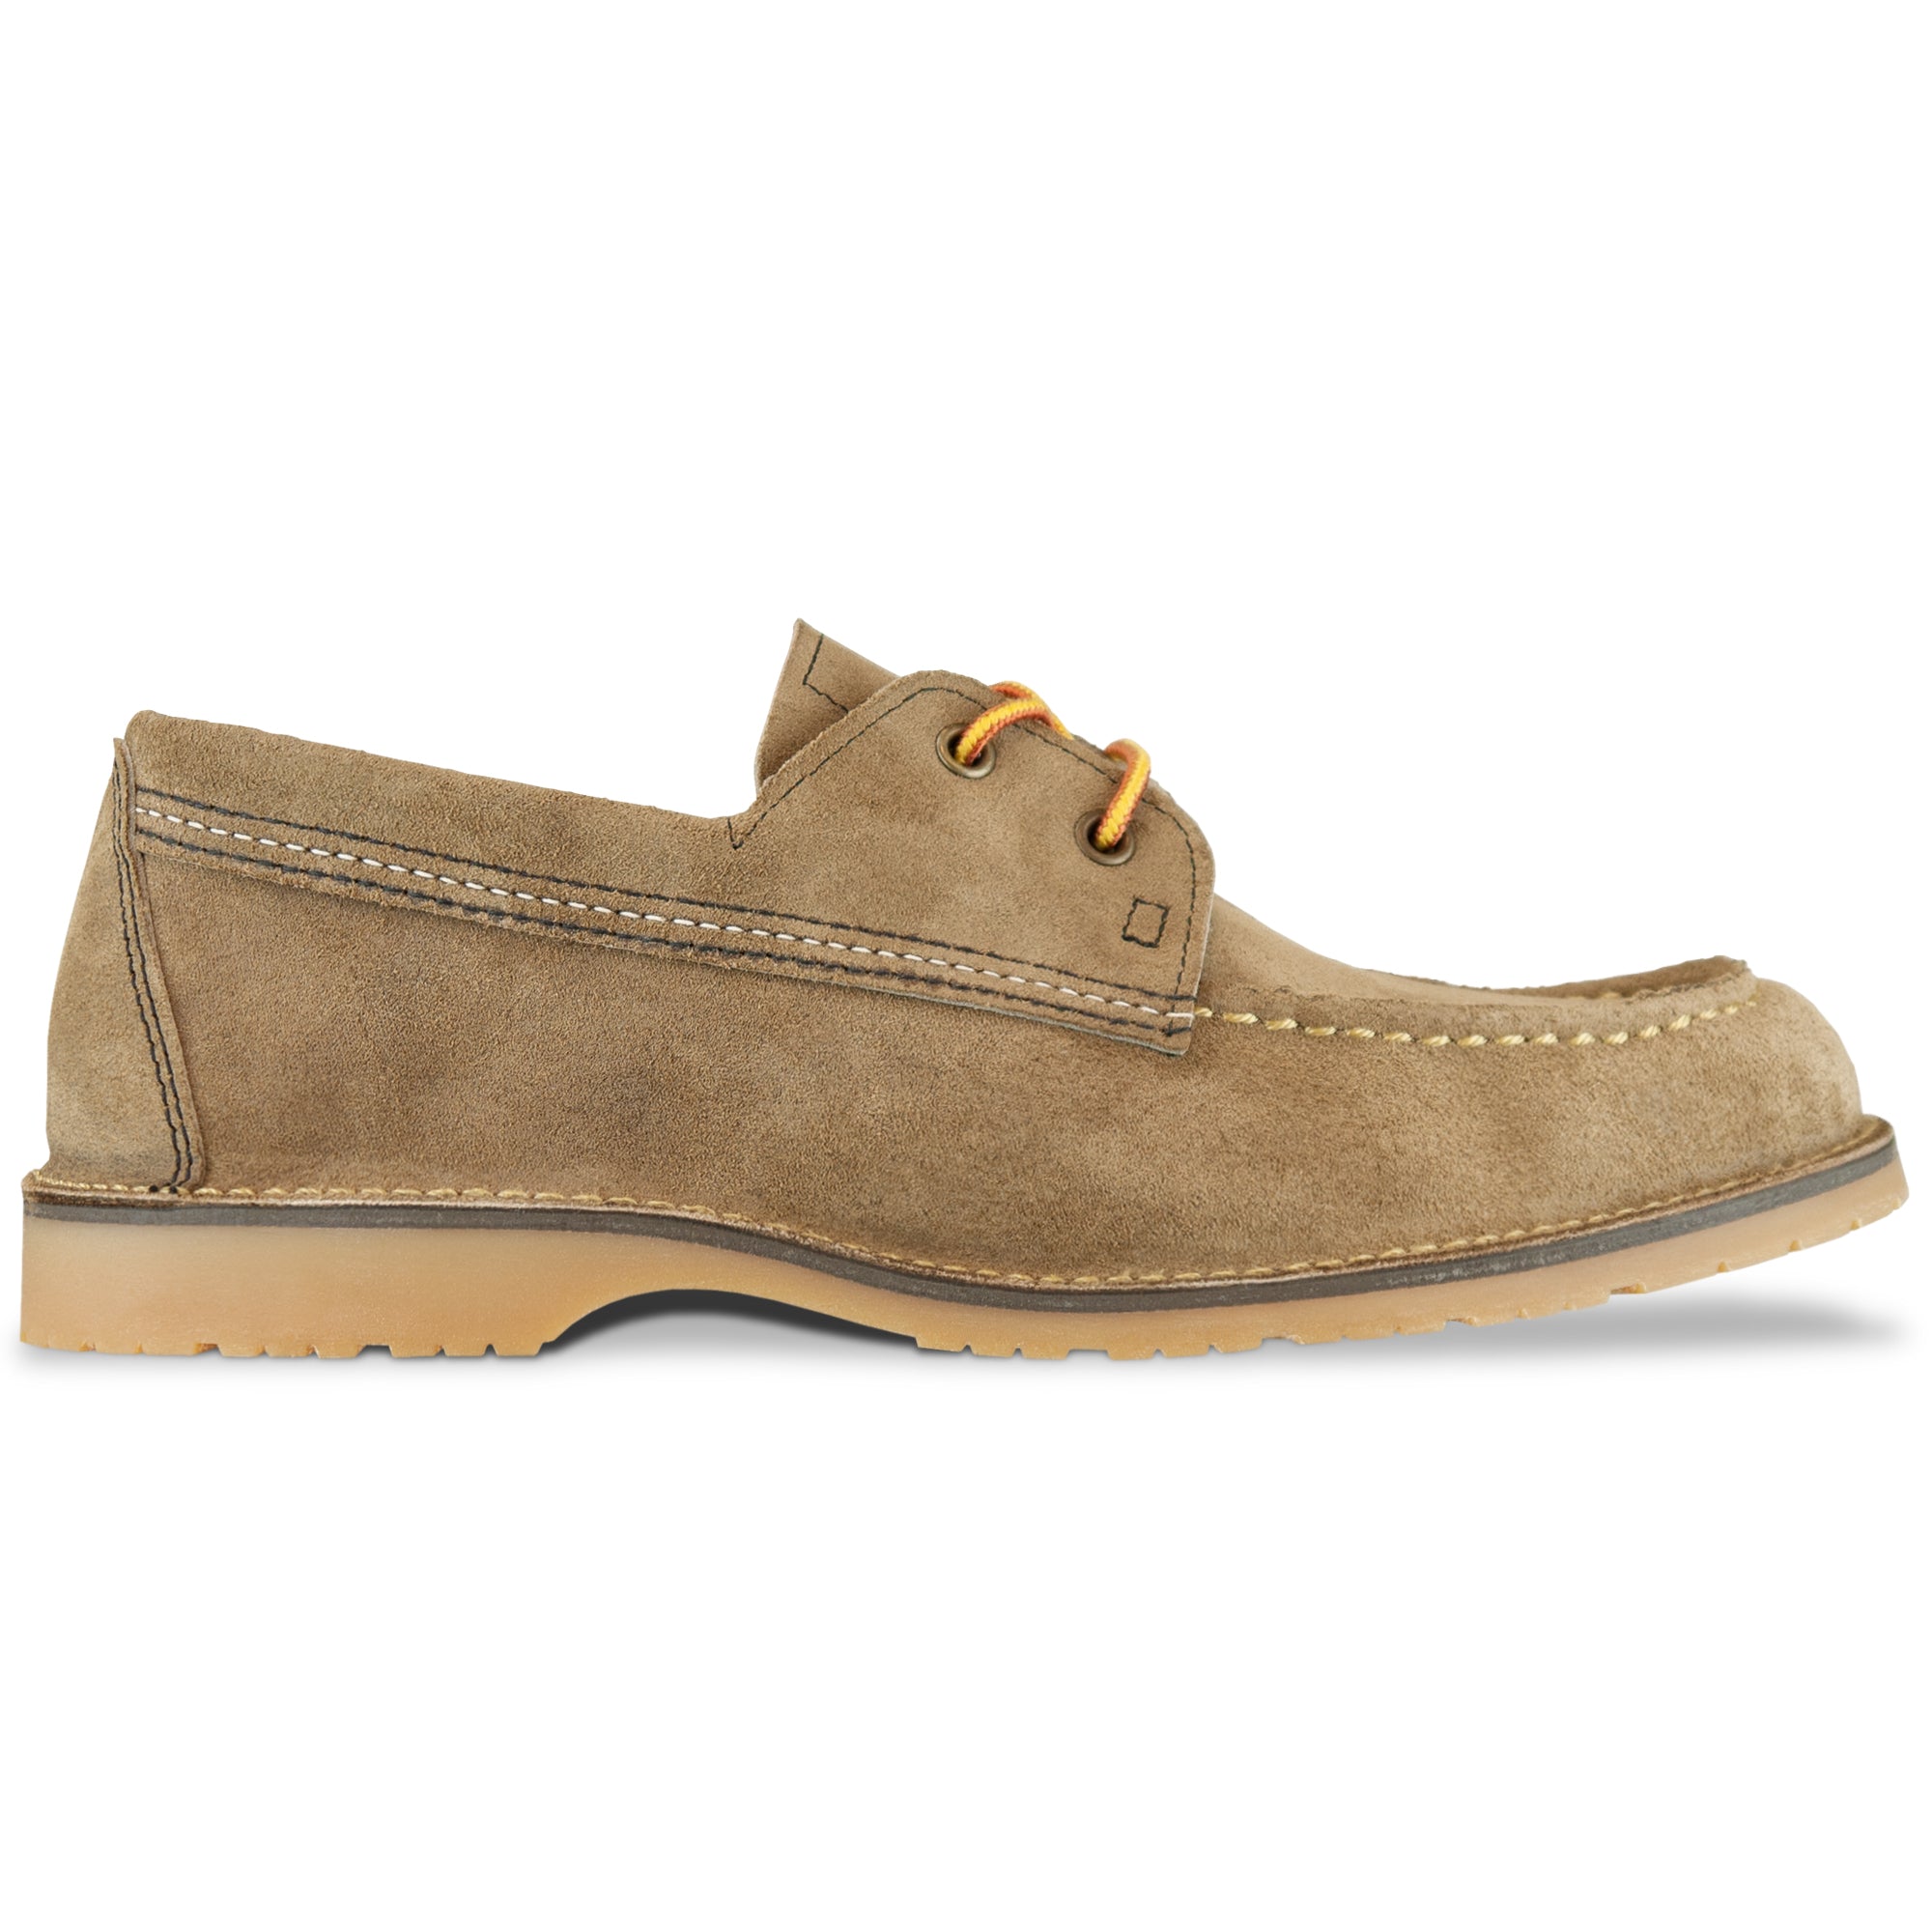 Red Wing 3330 Wacouta Camp Moc Shoe - Camel Mule Skin Leather